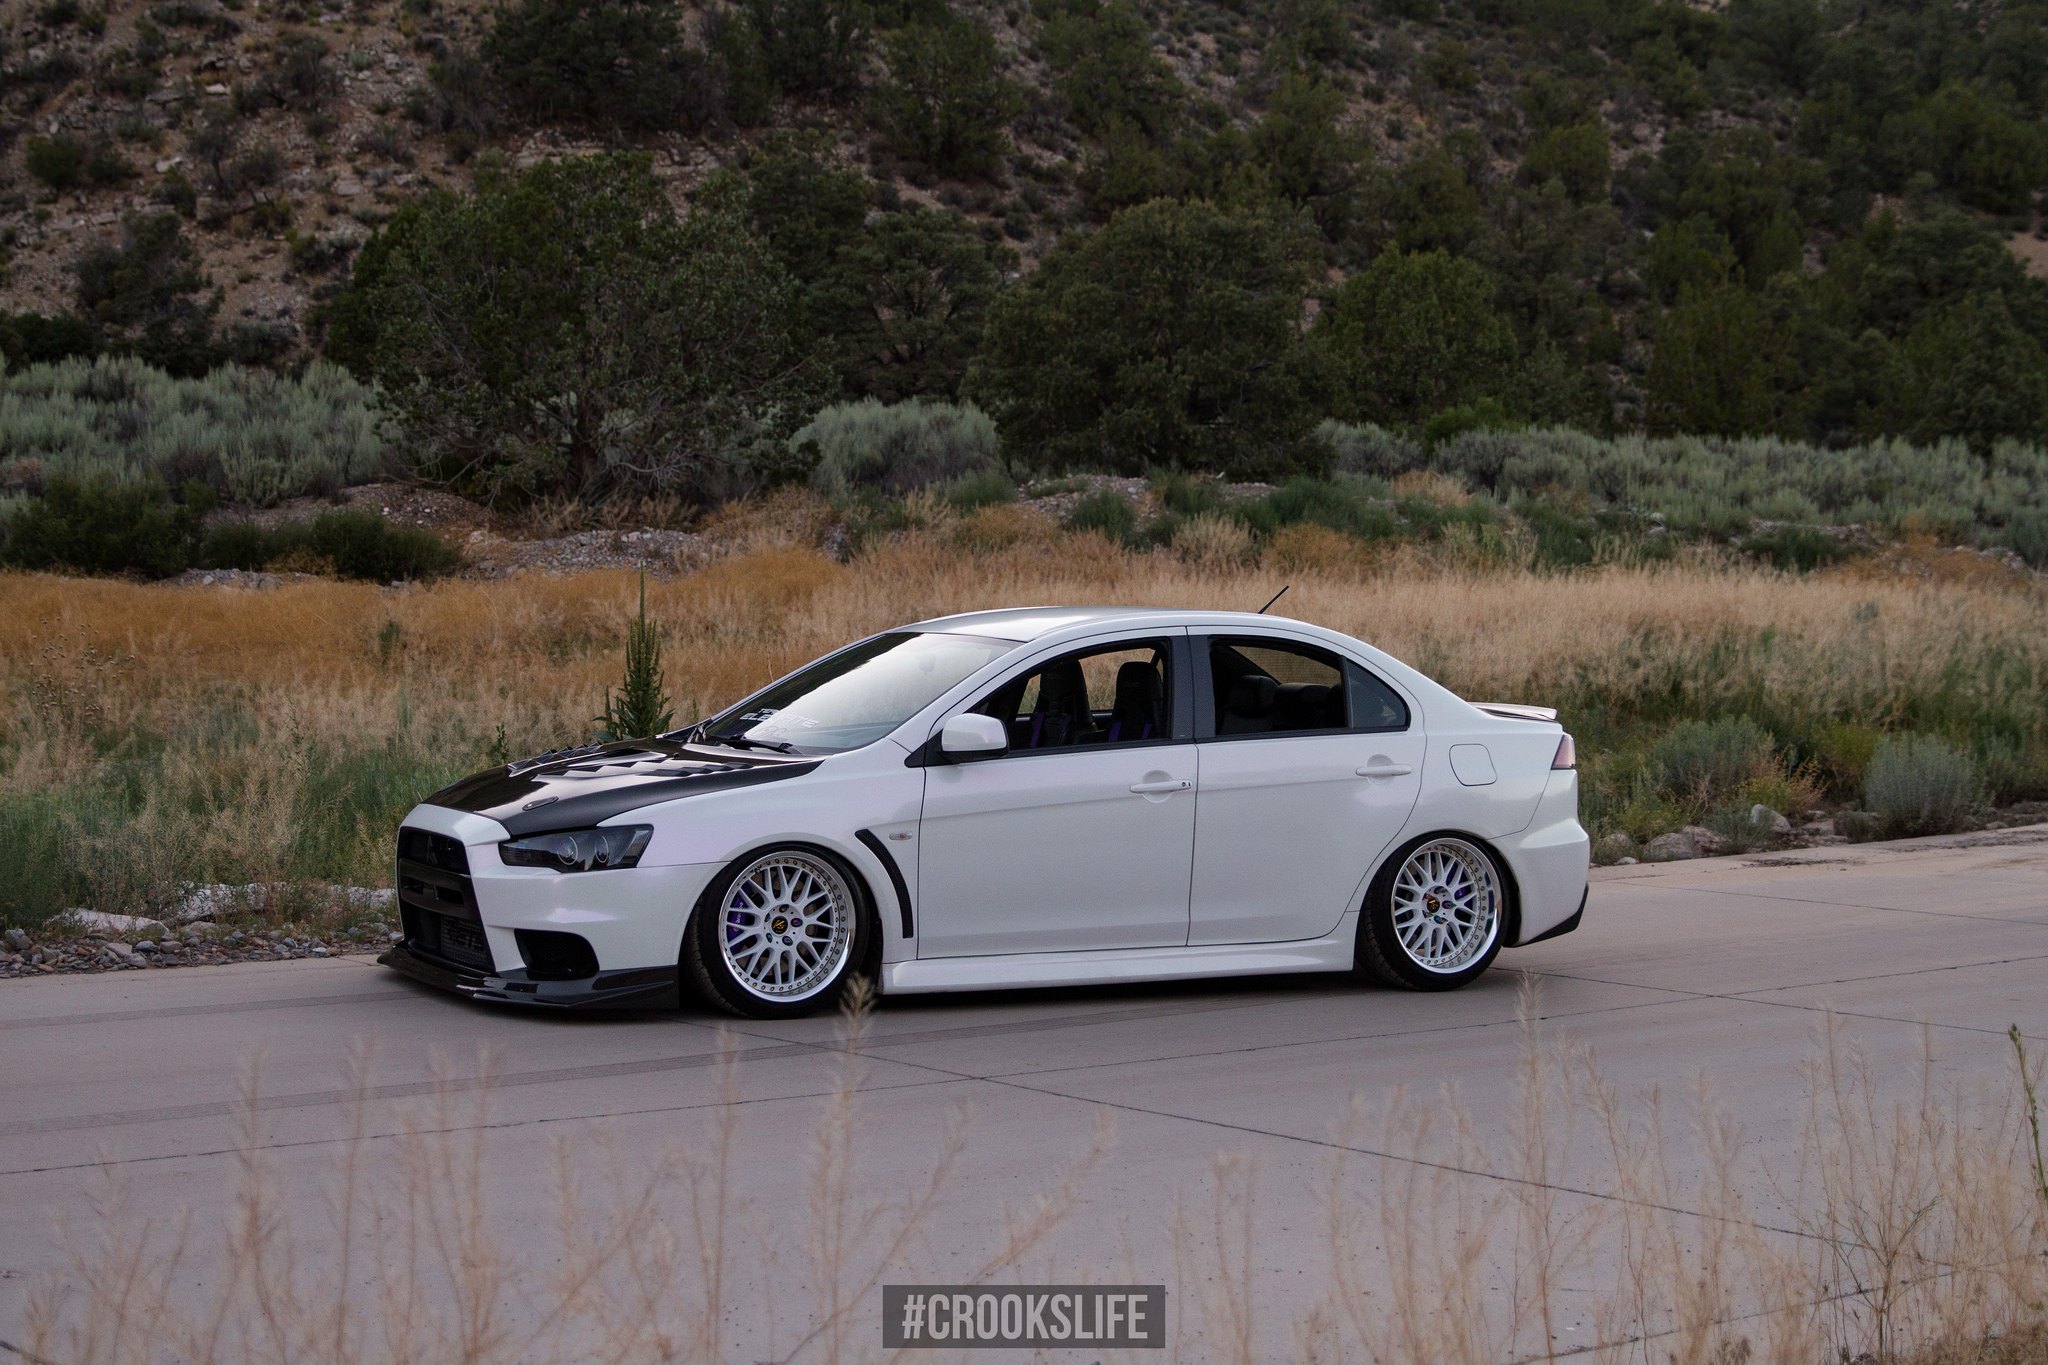 Custom Color Matched Wheels on Mitsubishi Lancer Evolution - Photo by Jimmy Crook